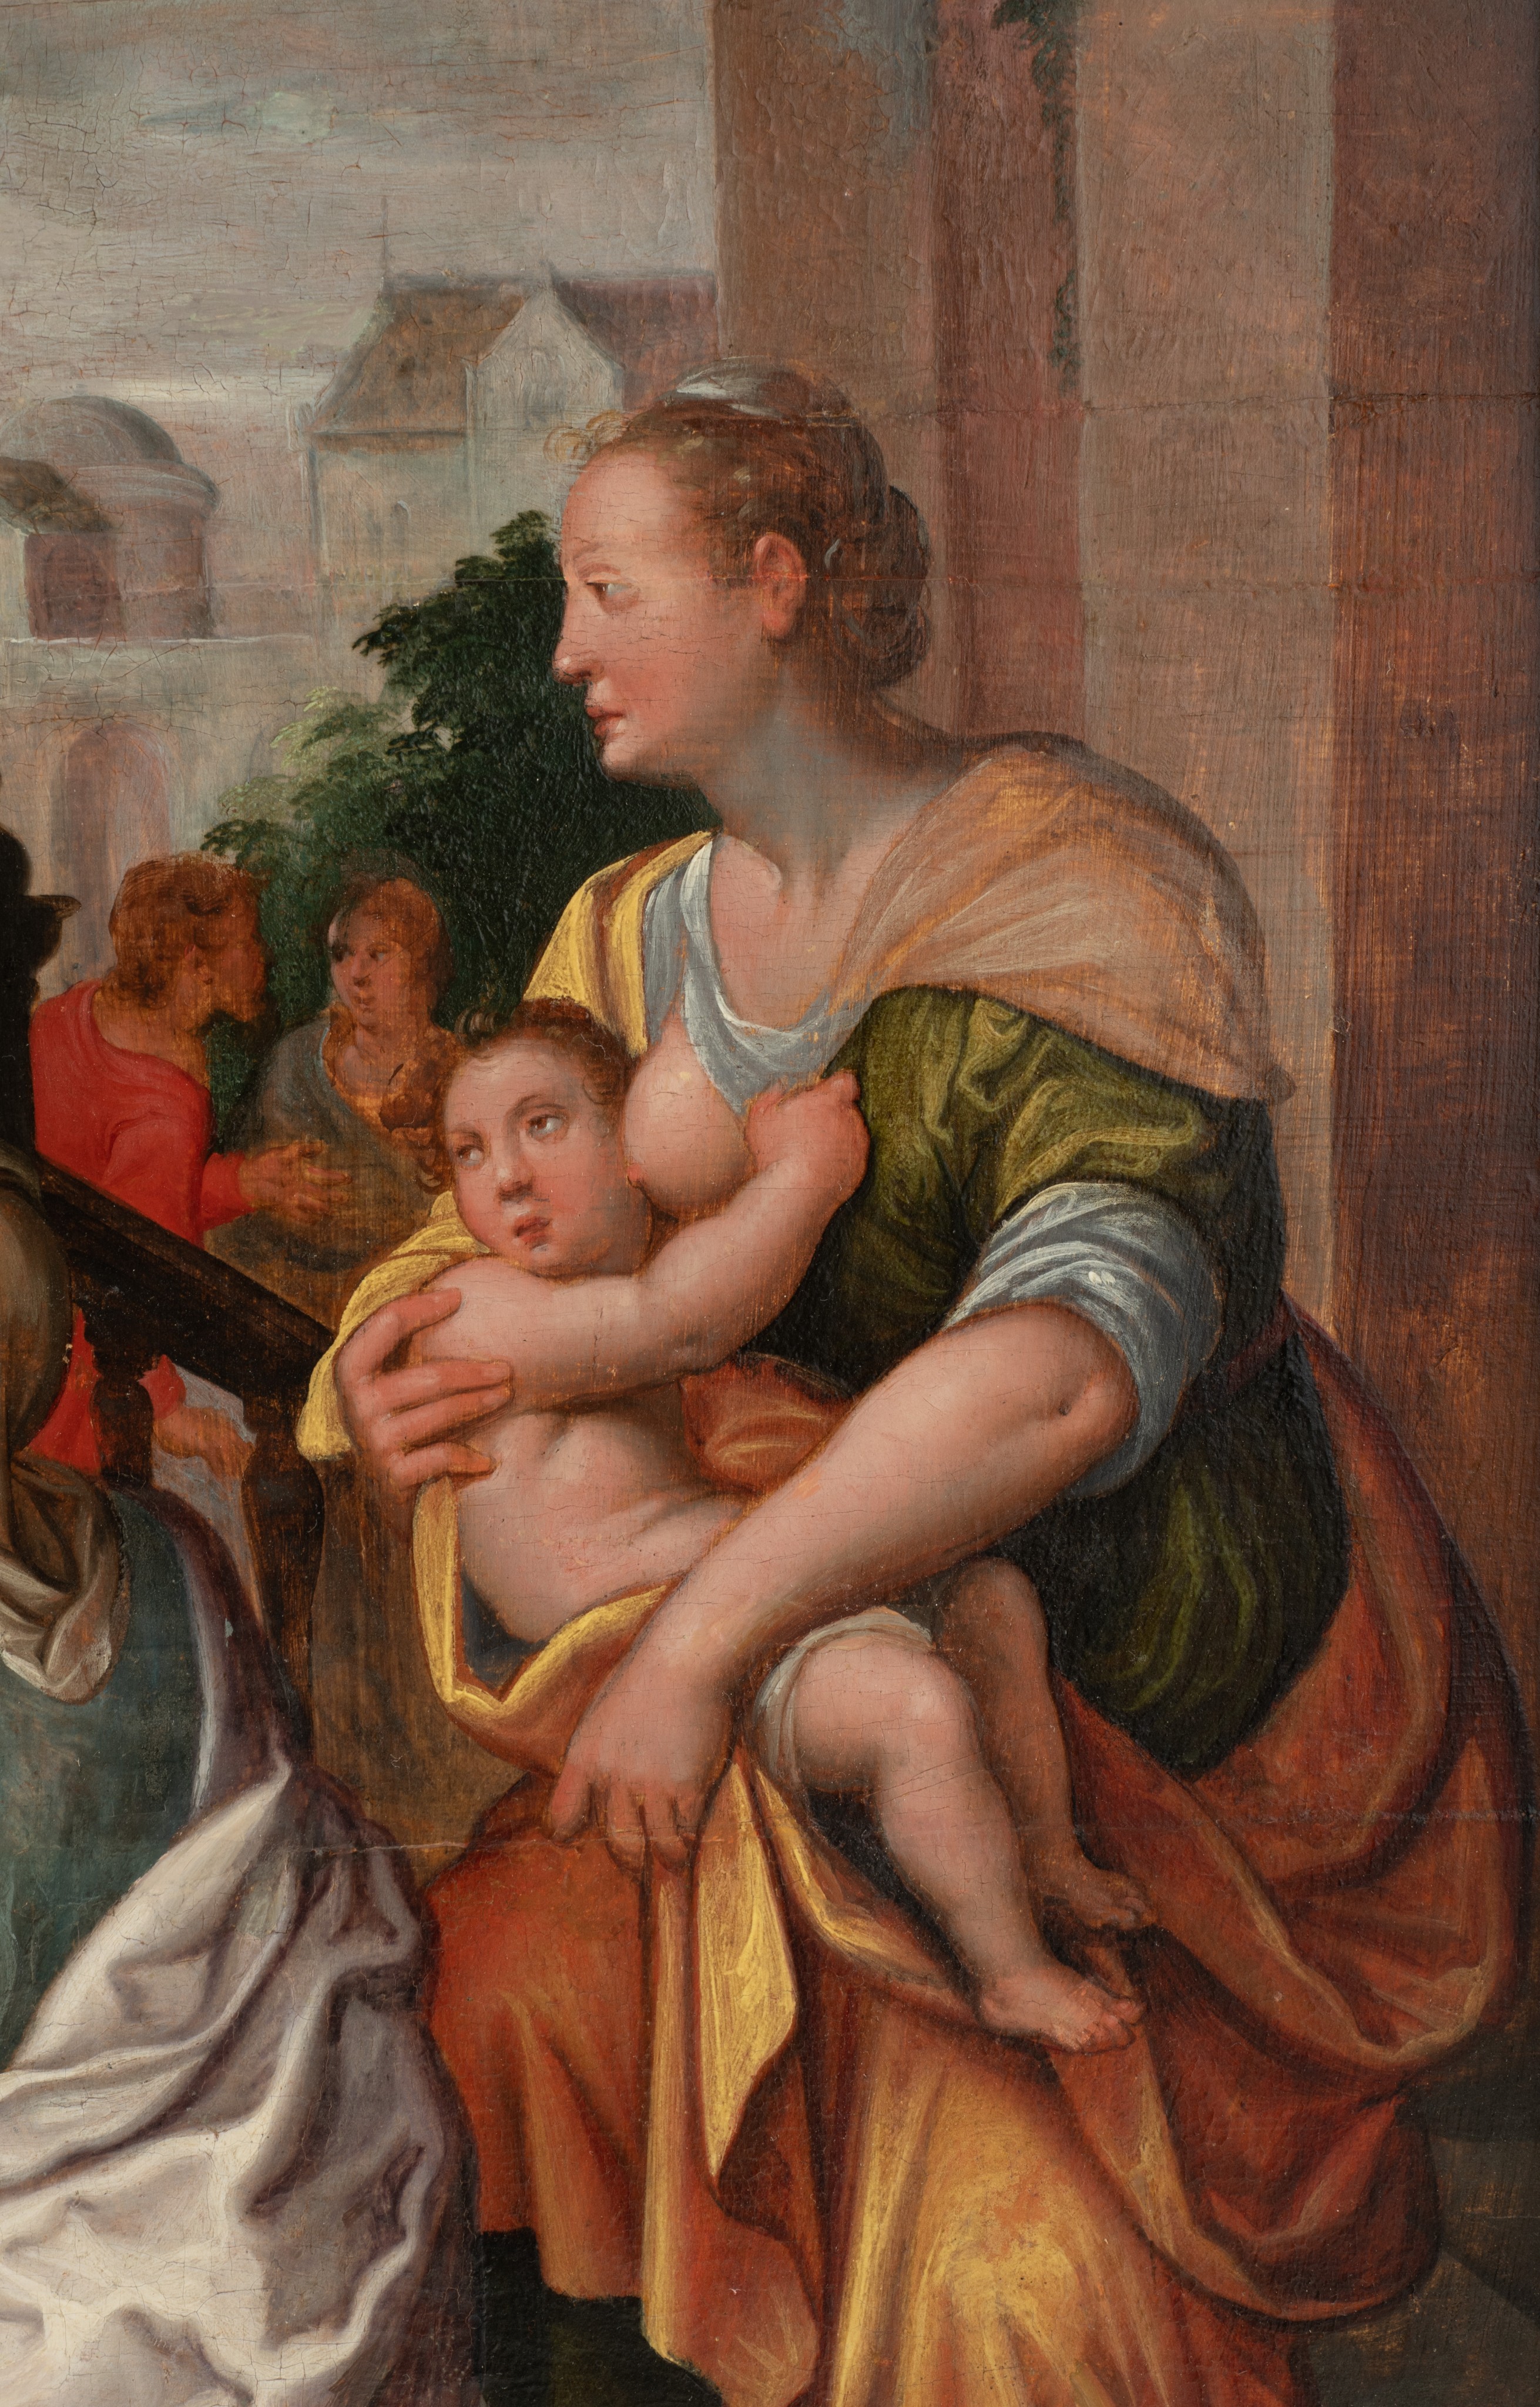 Attributed to Frans Floris, 'Let the children come to me', 16thC, oil on panel, 71 x 95 cm - Image 5 of 9